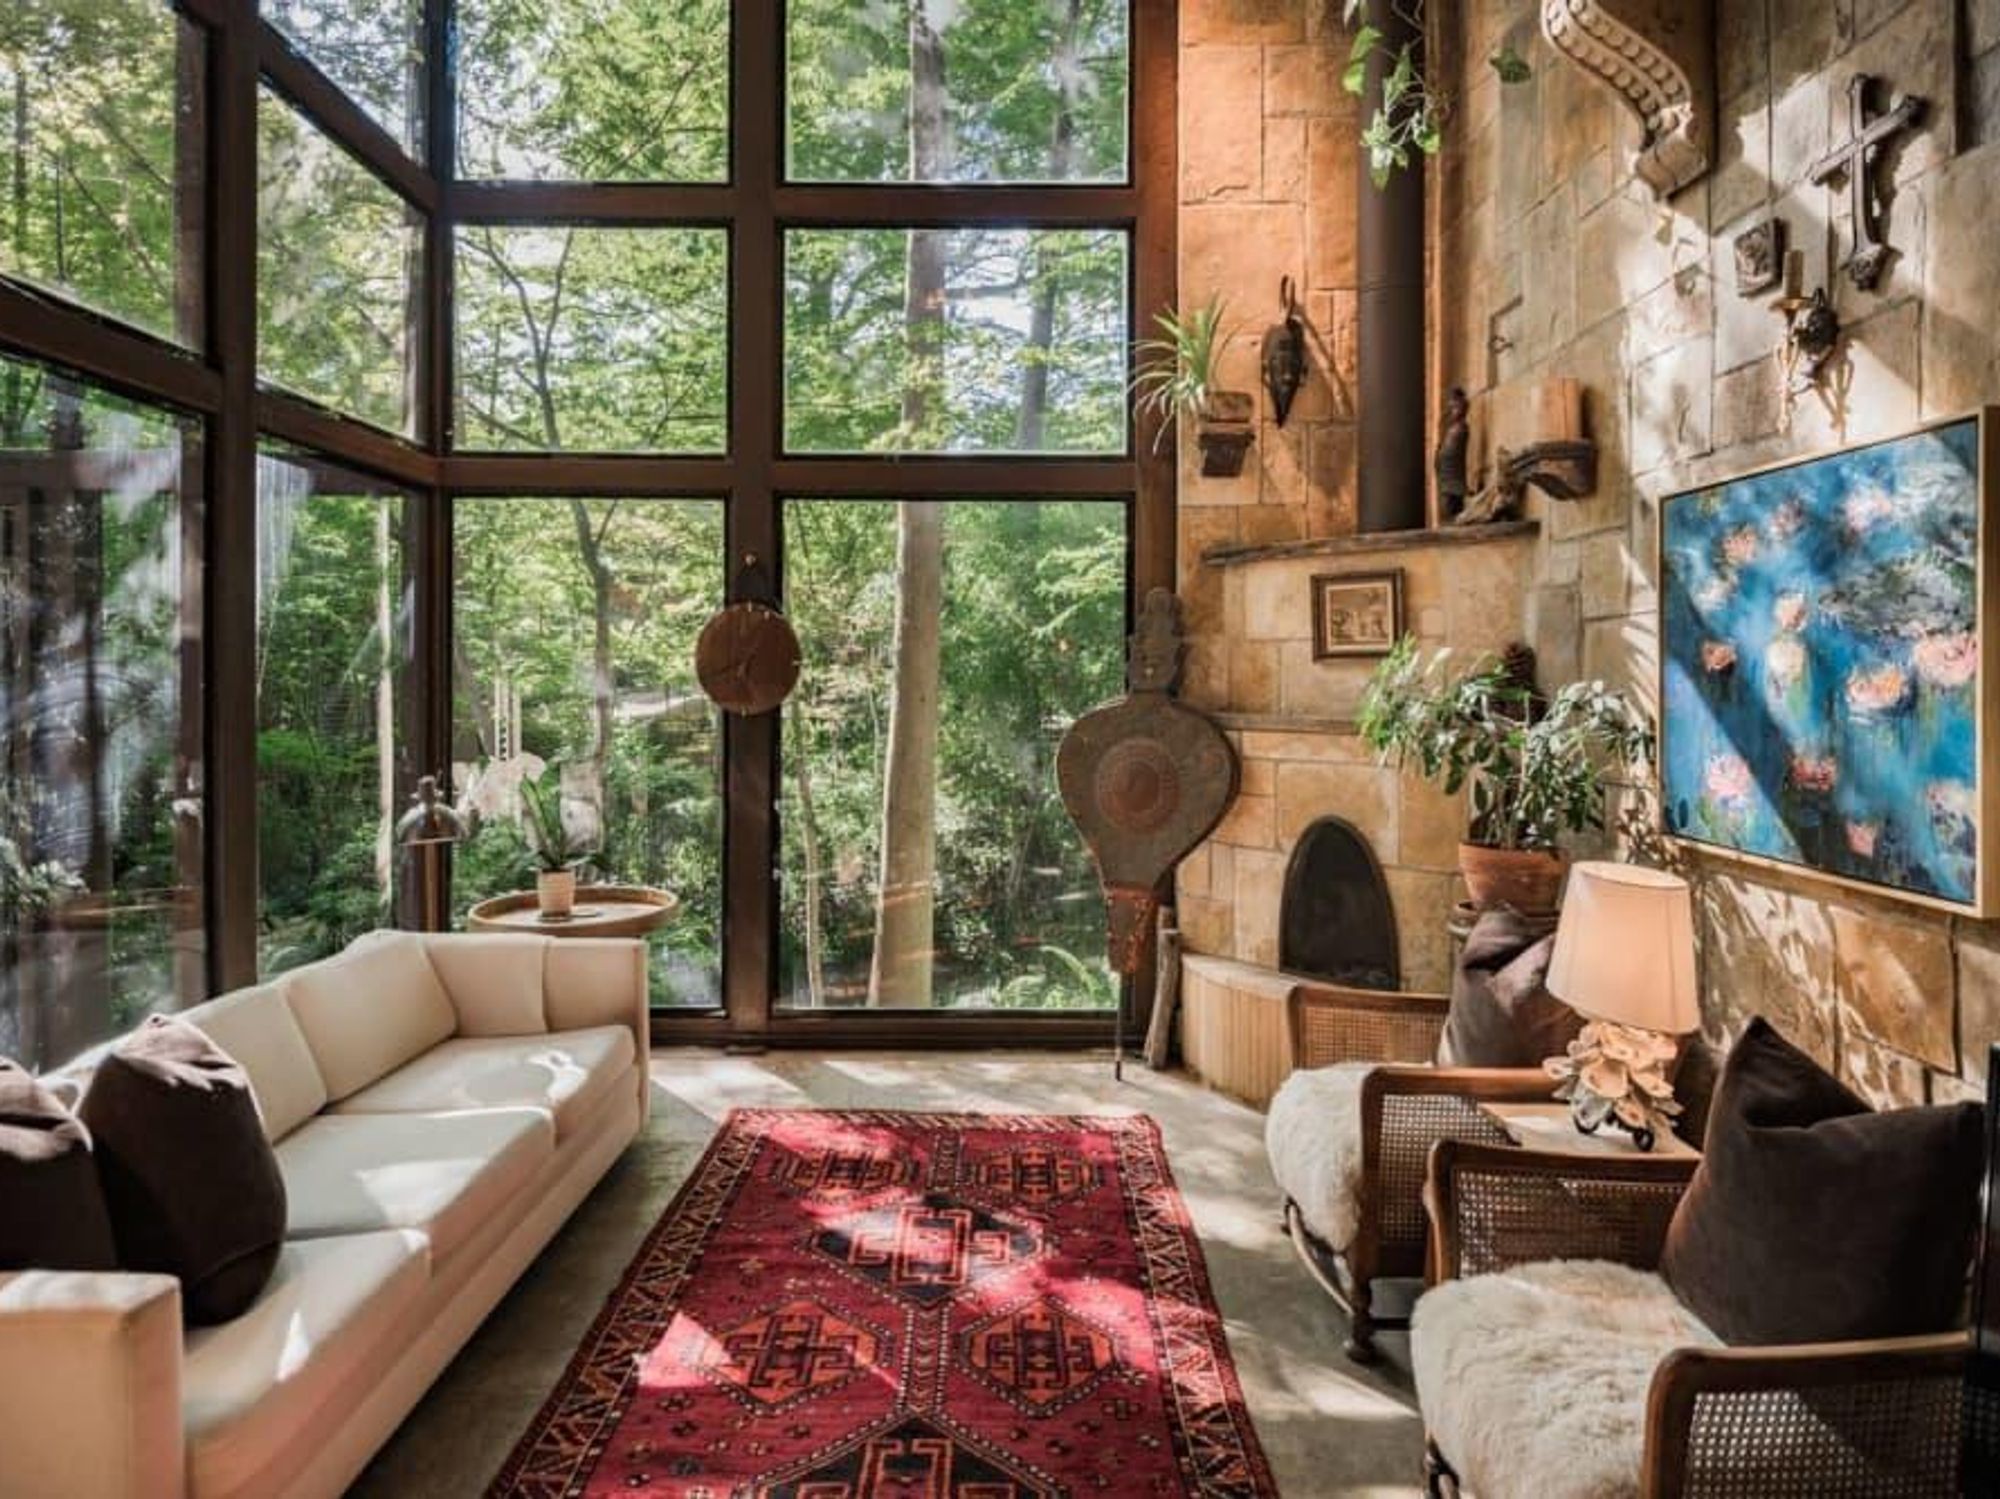 Dallas Wish-listed Airbnb